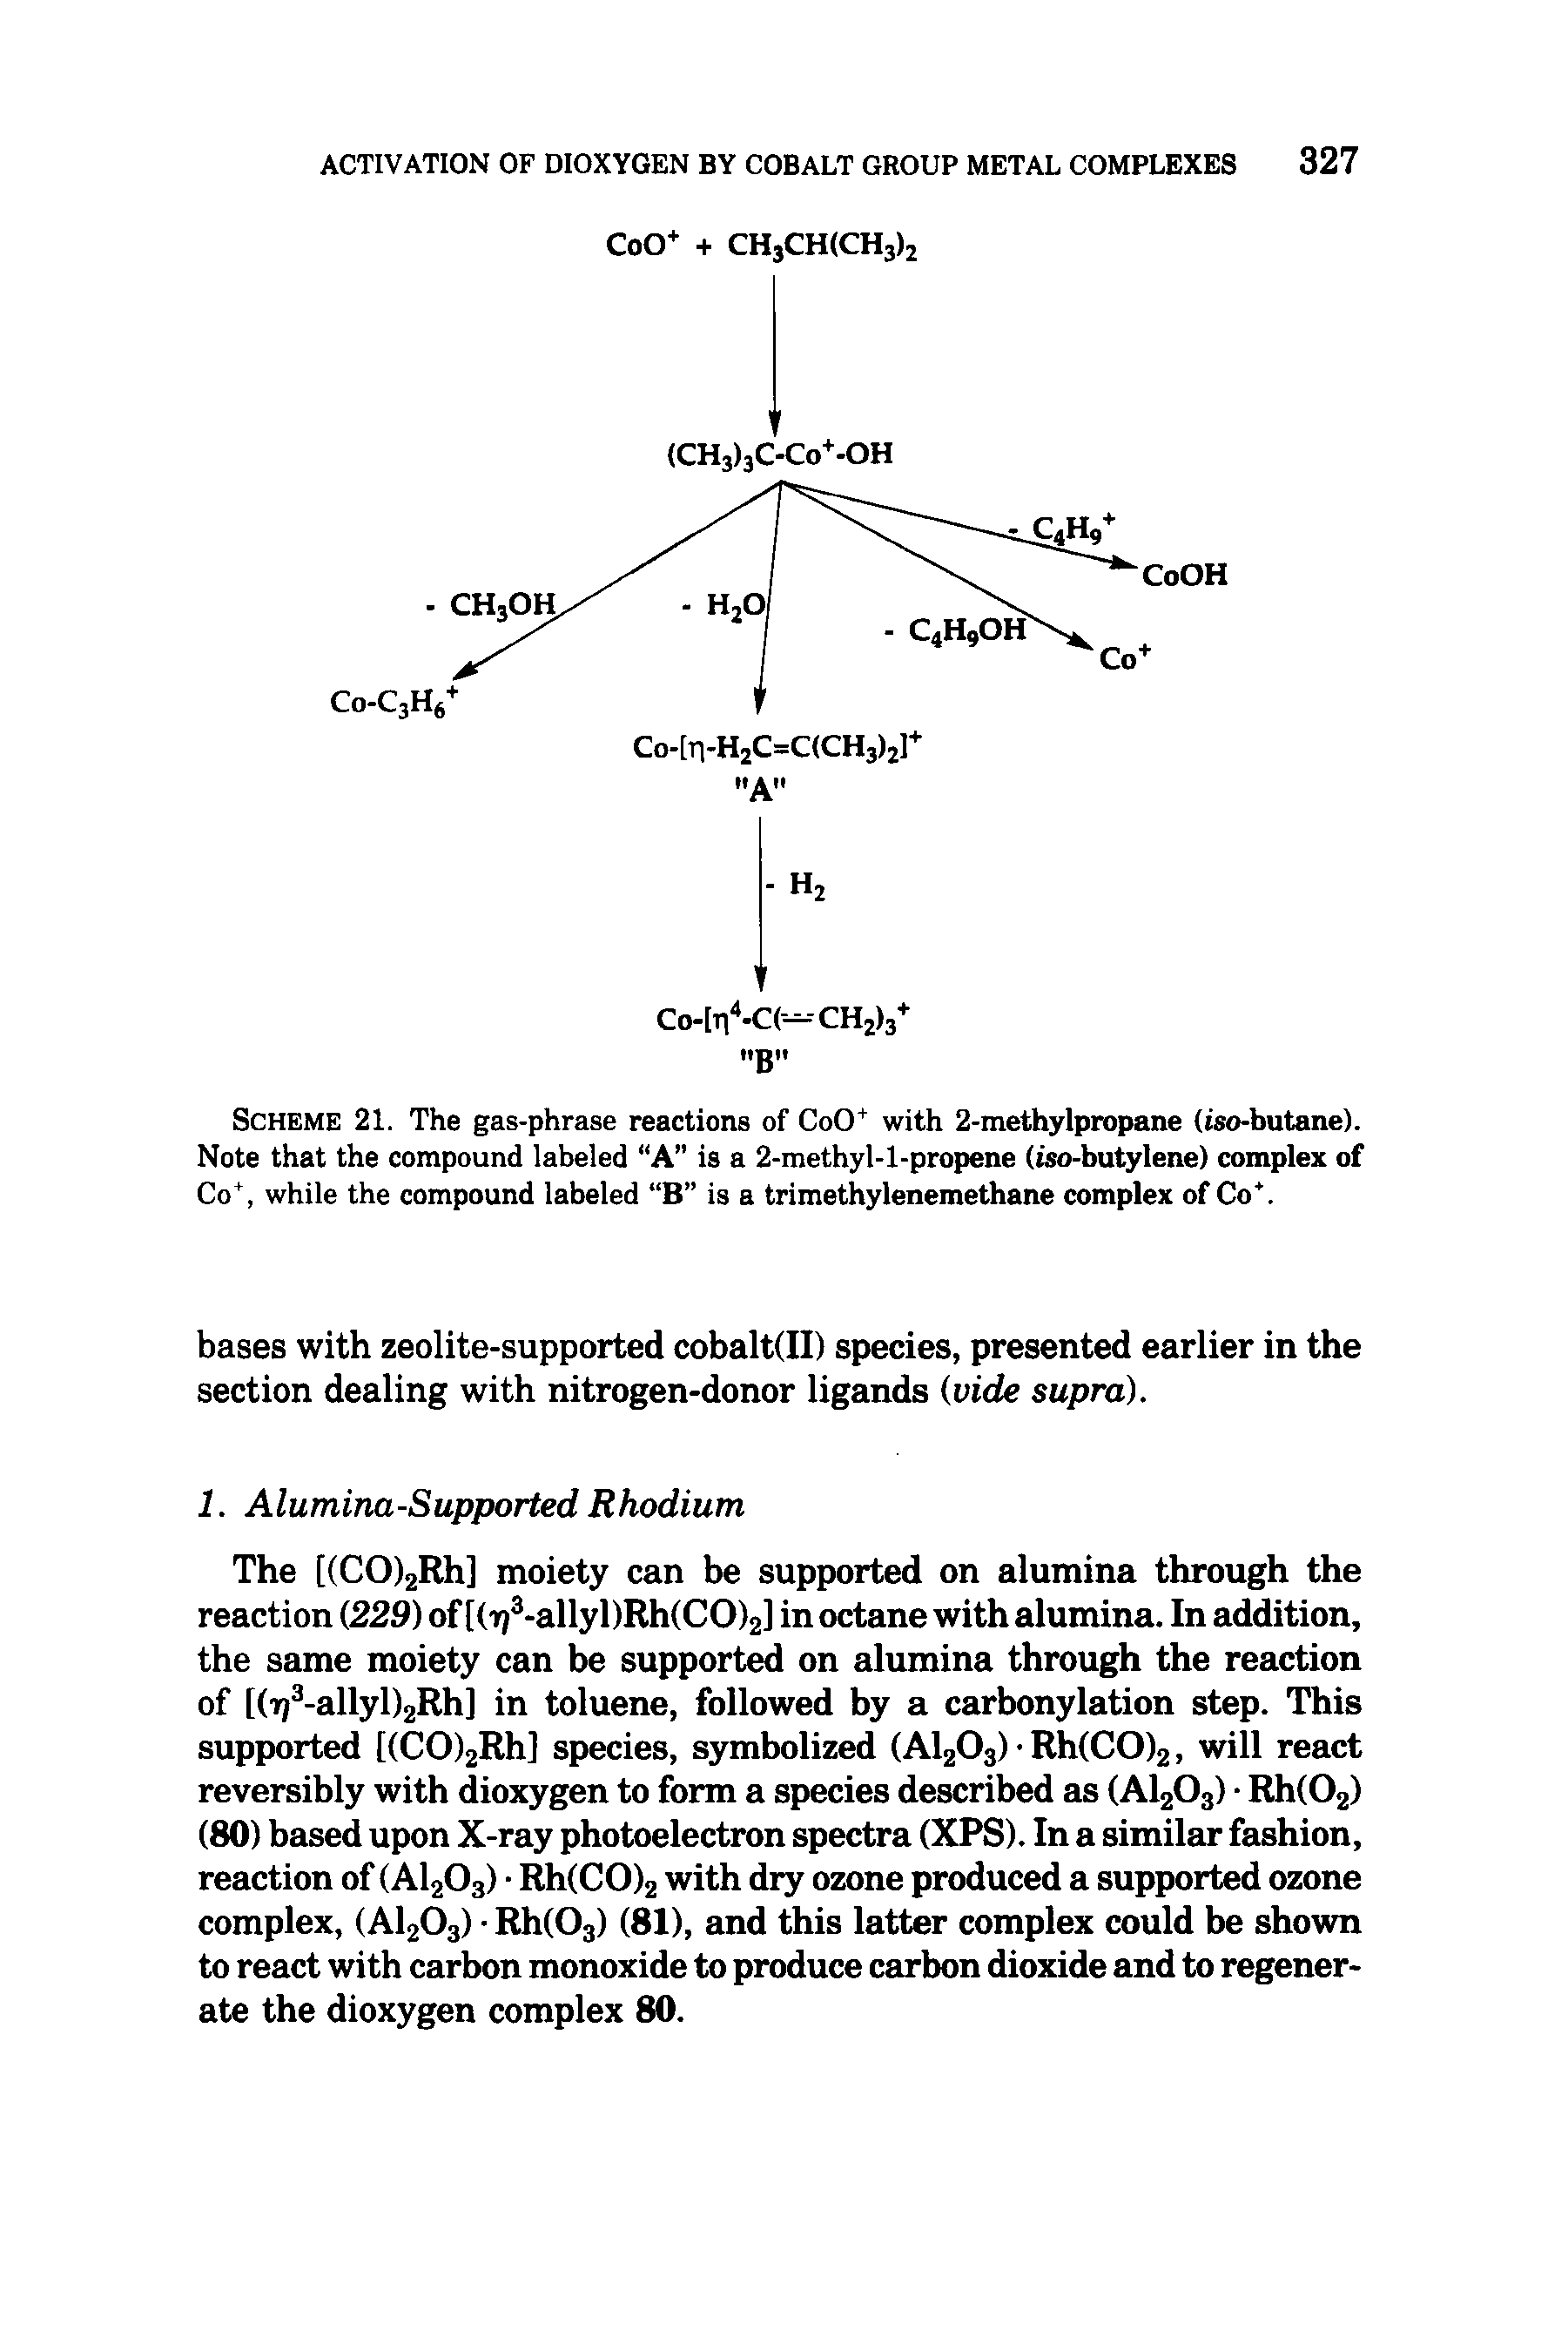 Scheme 21. The gas-phrase reactions of CoO+ with 2-methylpropane (iso-butane). Note that the compound labeled A is a 2-methyl-l-propene (iso-butylene) complex of Co , while the compound labeled B is a trimethylenemethane complex of Co. ...